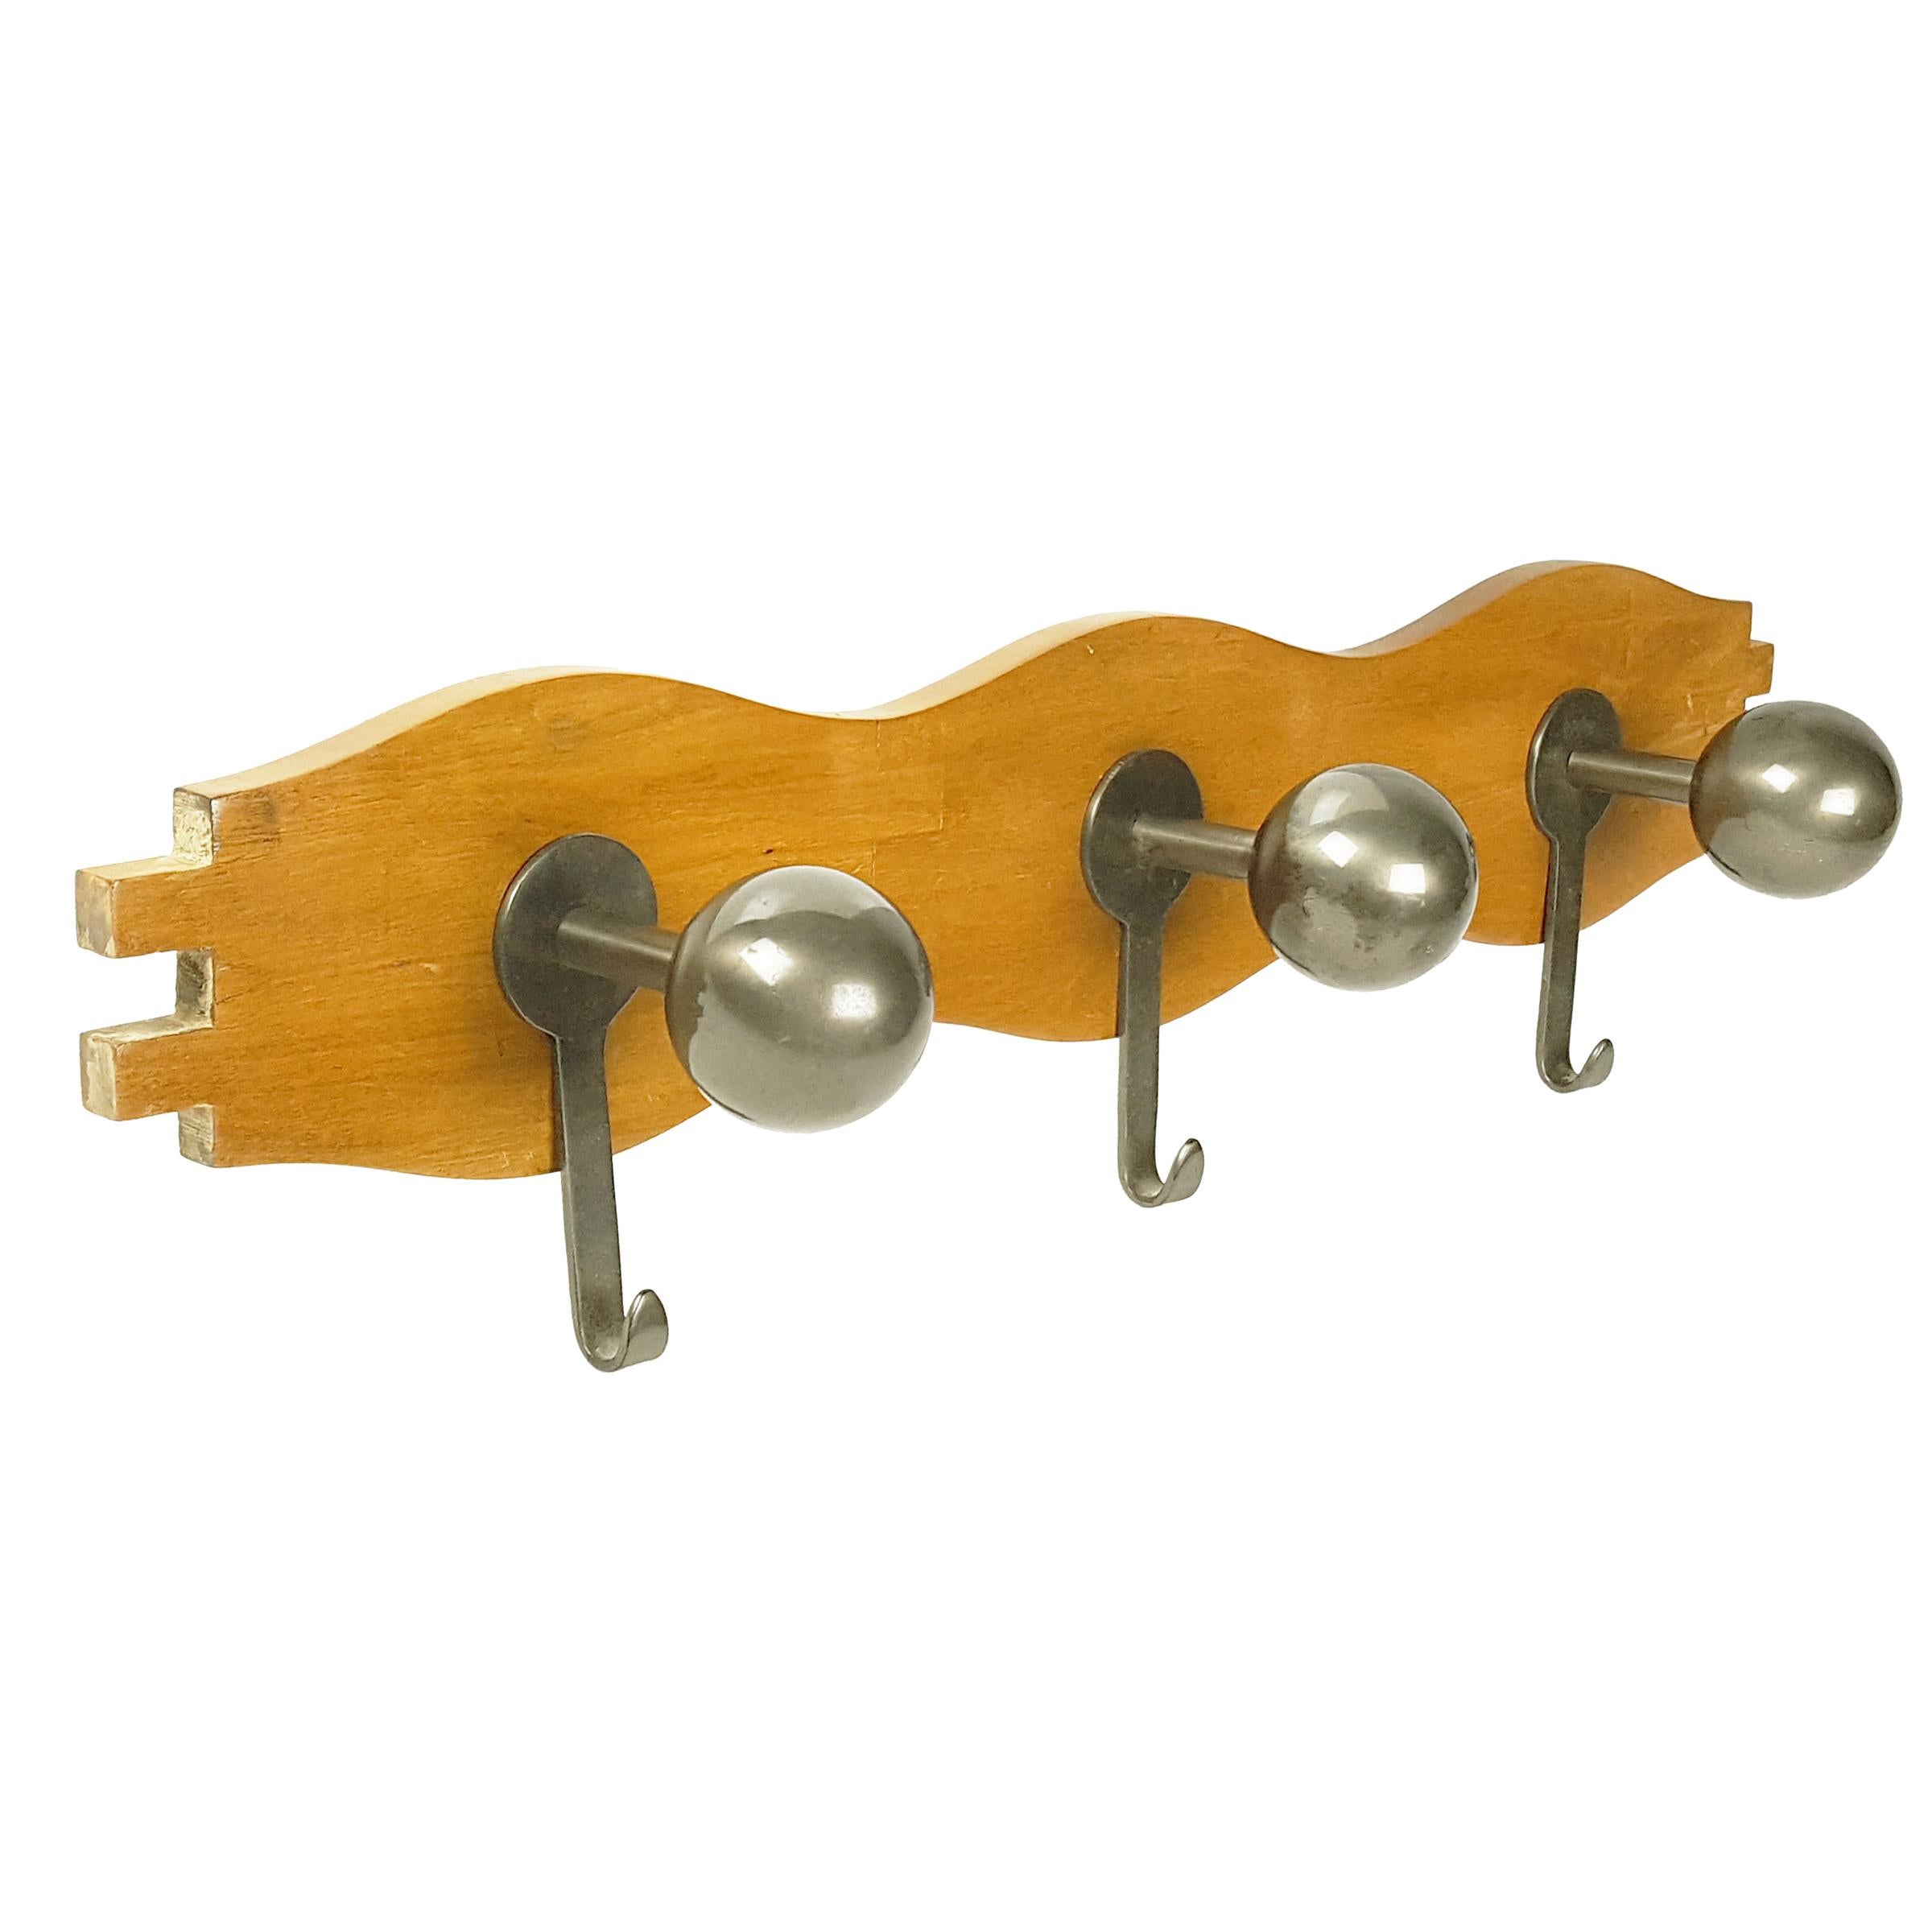 Walnut and Burnished Brass Wall Coat Rack "Attaccapanni" by Mazza for Artemide